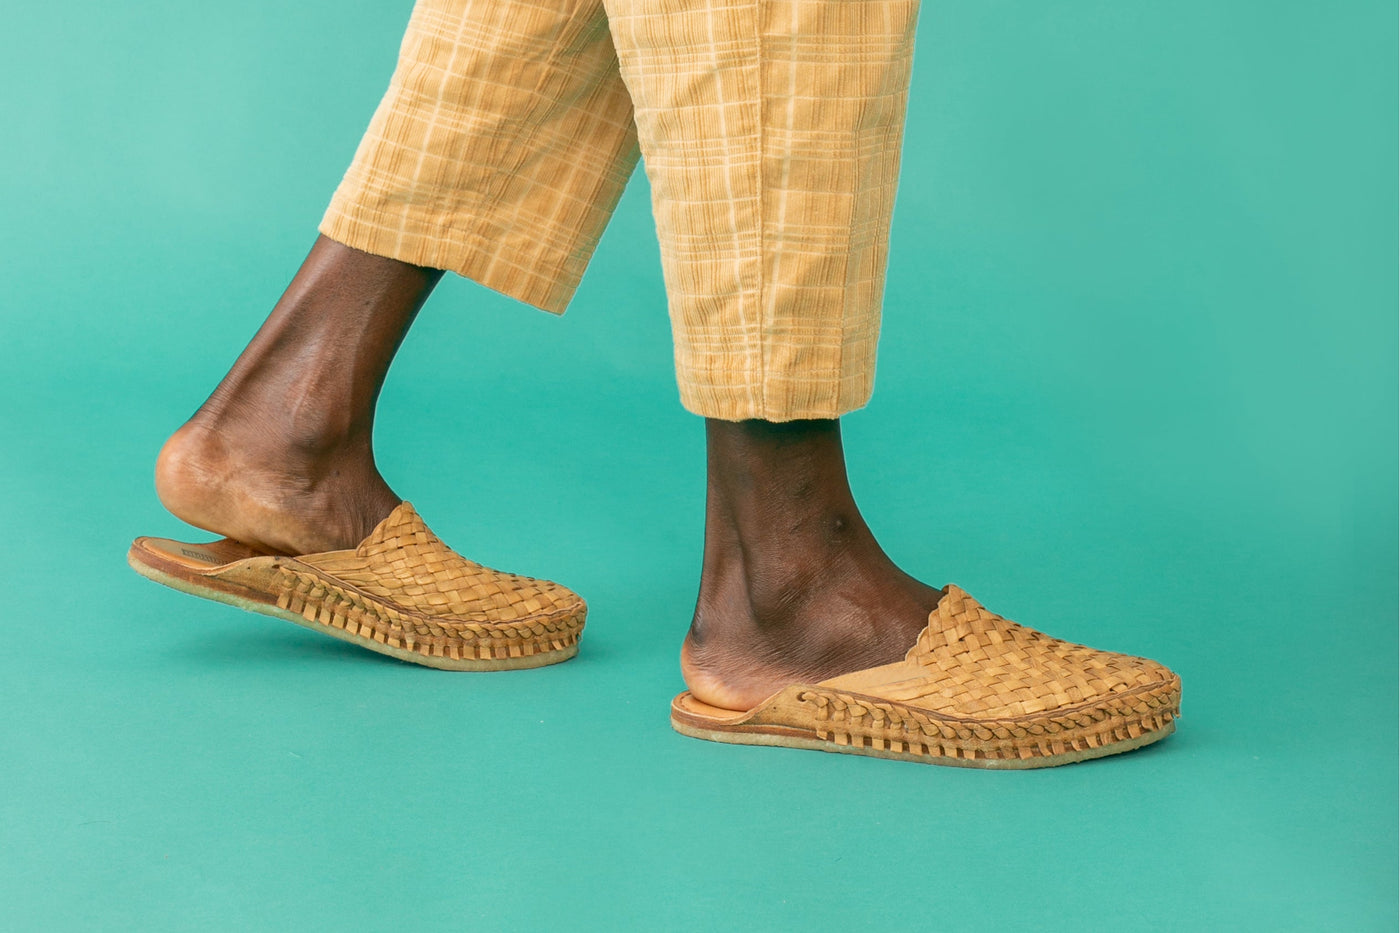 Woven City Slipper in Honey + No Stripes by Mohinders